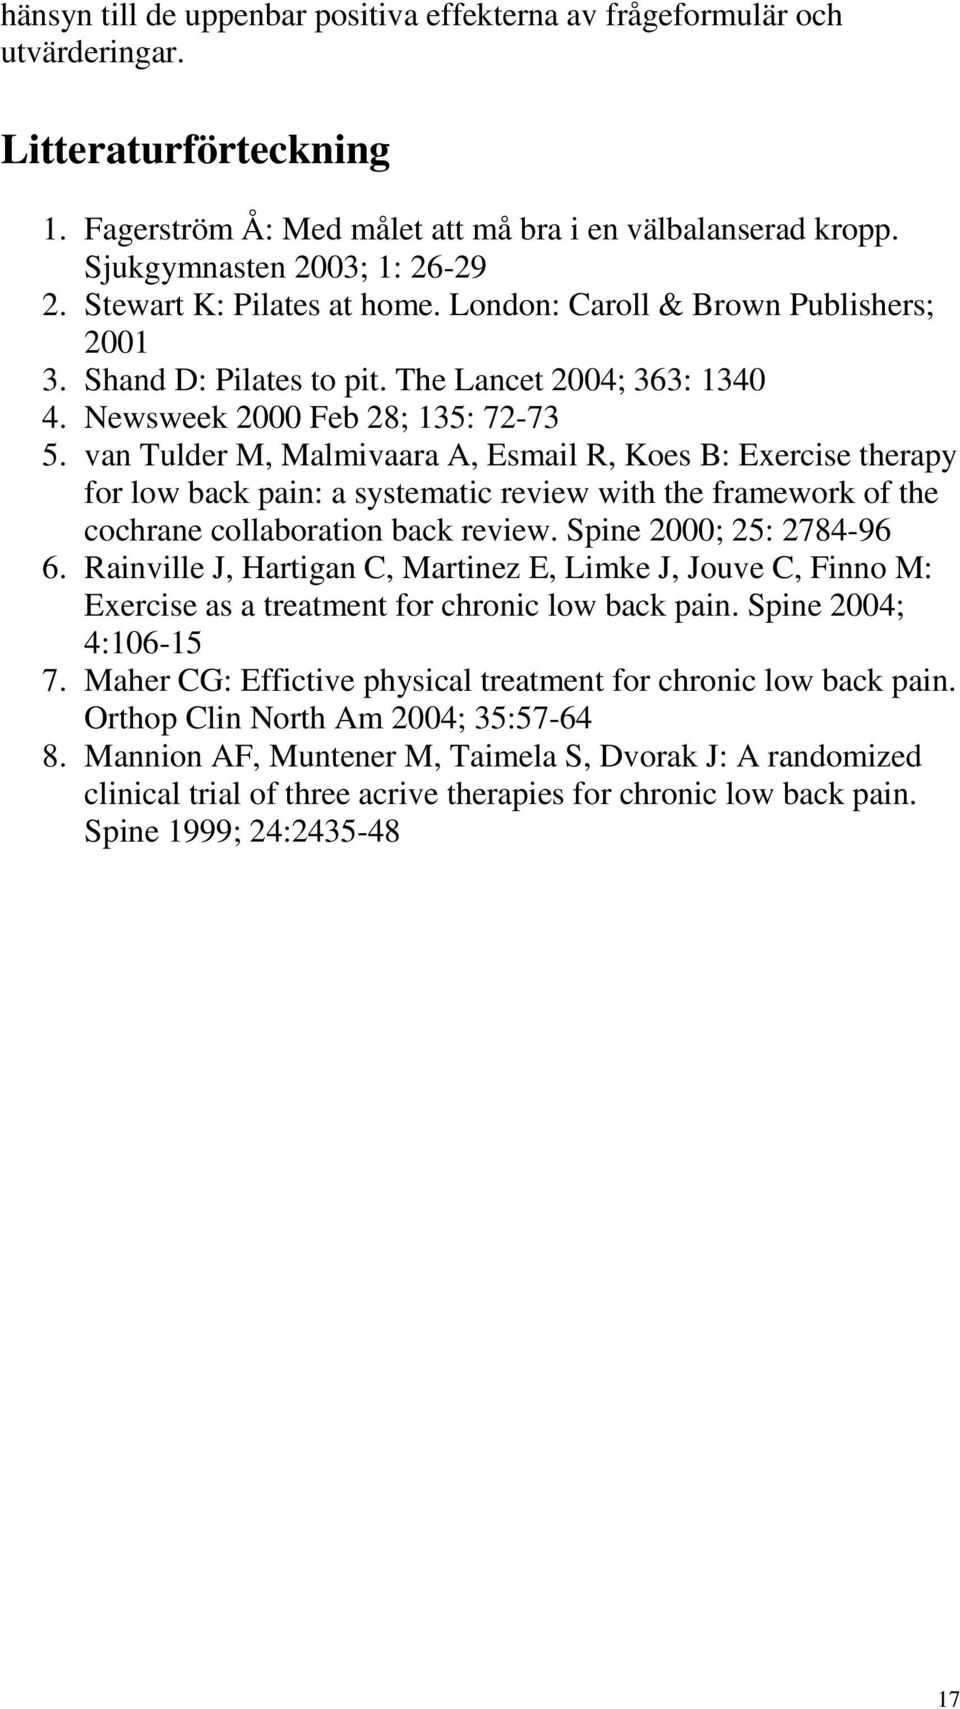 van Tulder M, Malmivaara A, Esmail R, Koes B: Exercise therapy for low back pain: a systematic review with the framework of the cochrane collaboration back review. Spine 2000; 25: 2784-96 6.